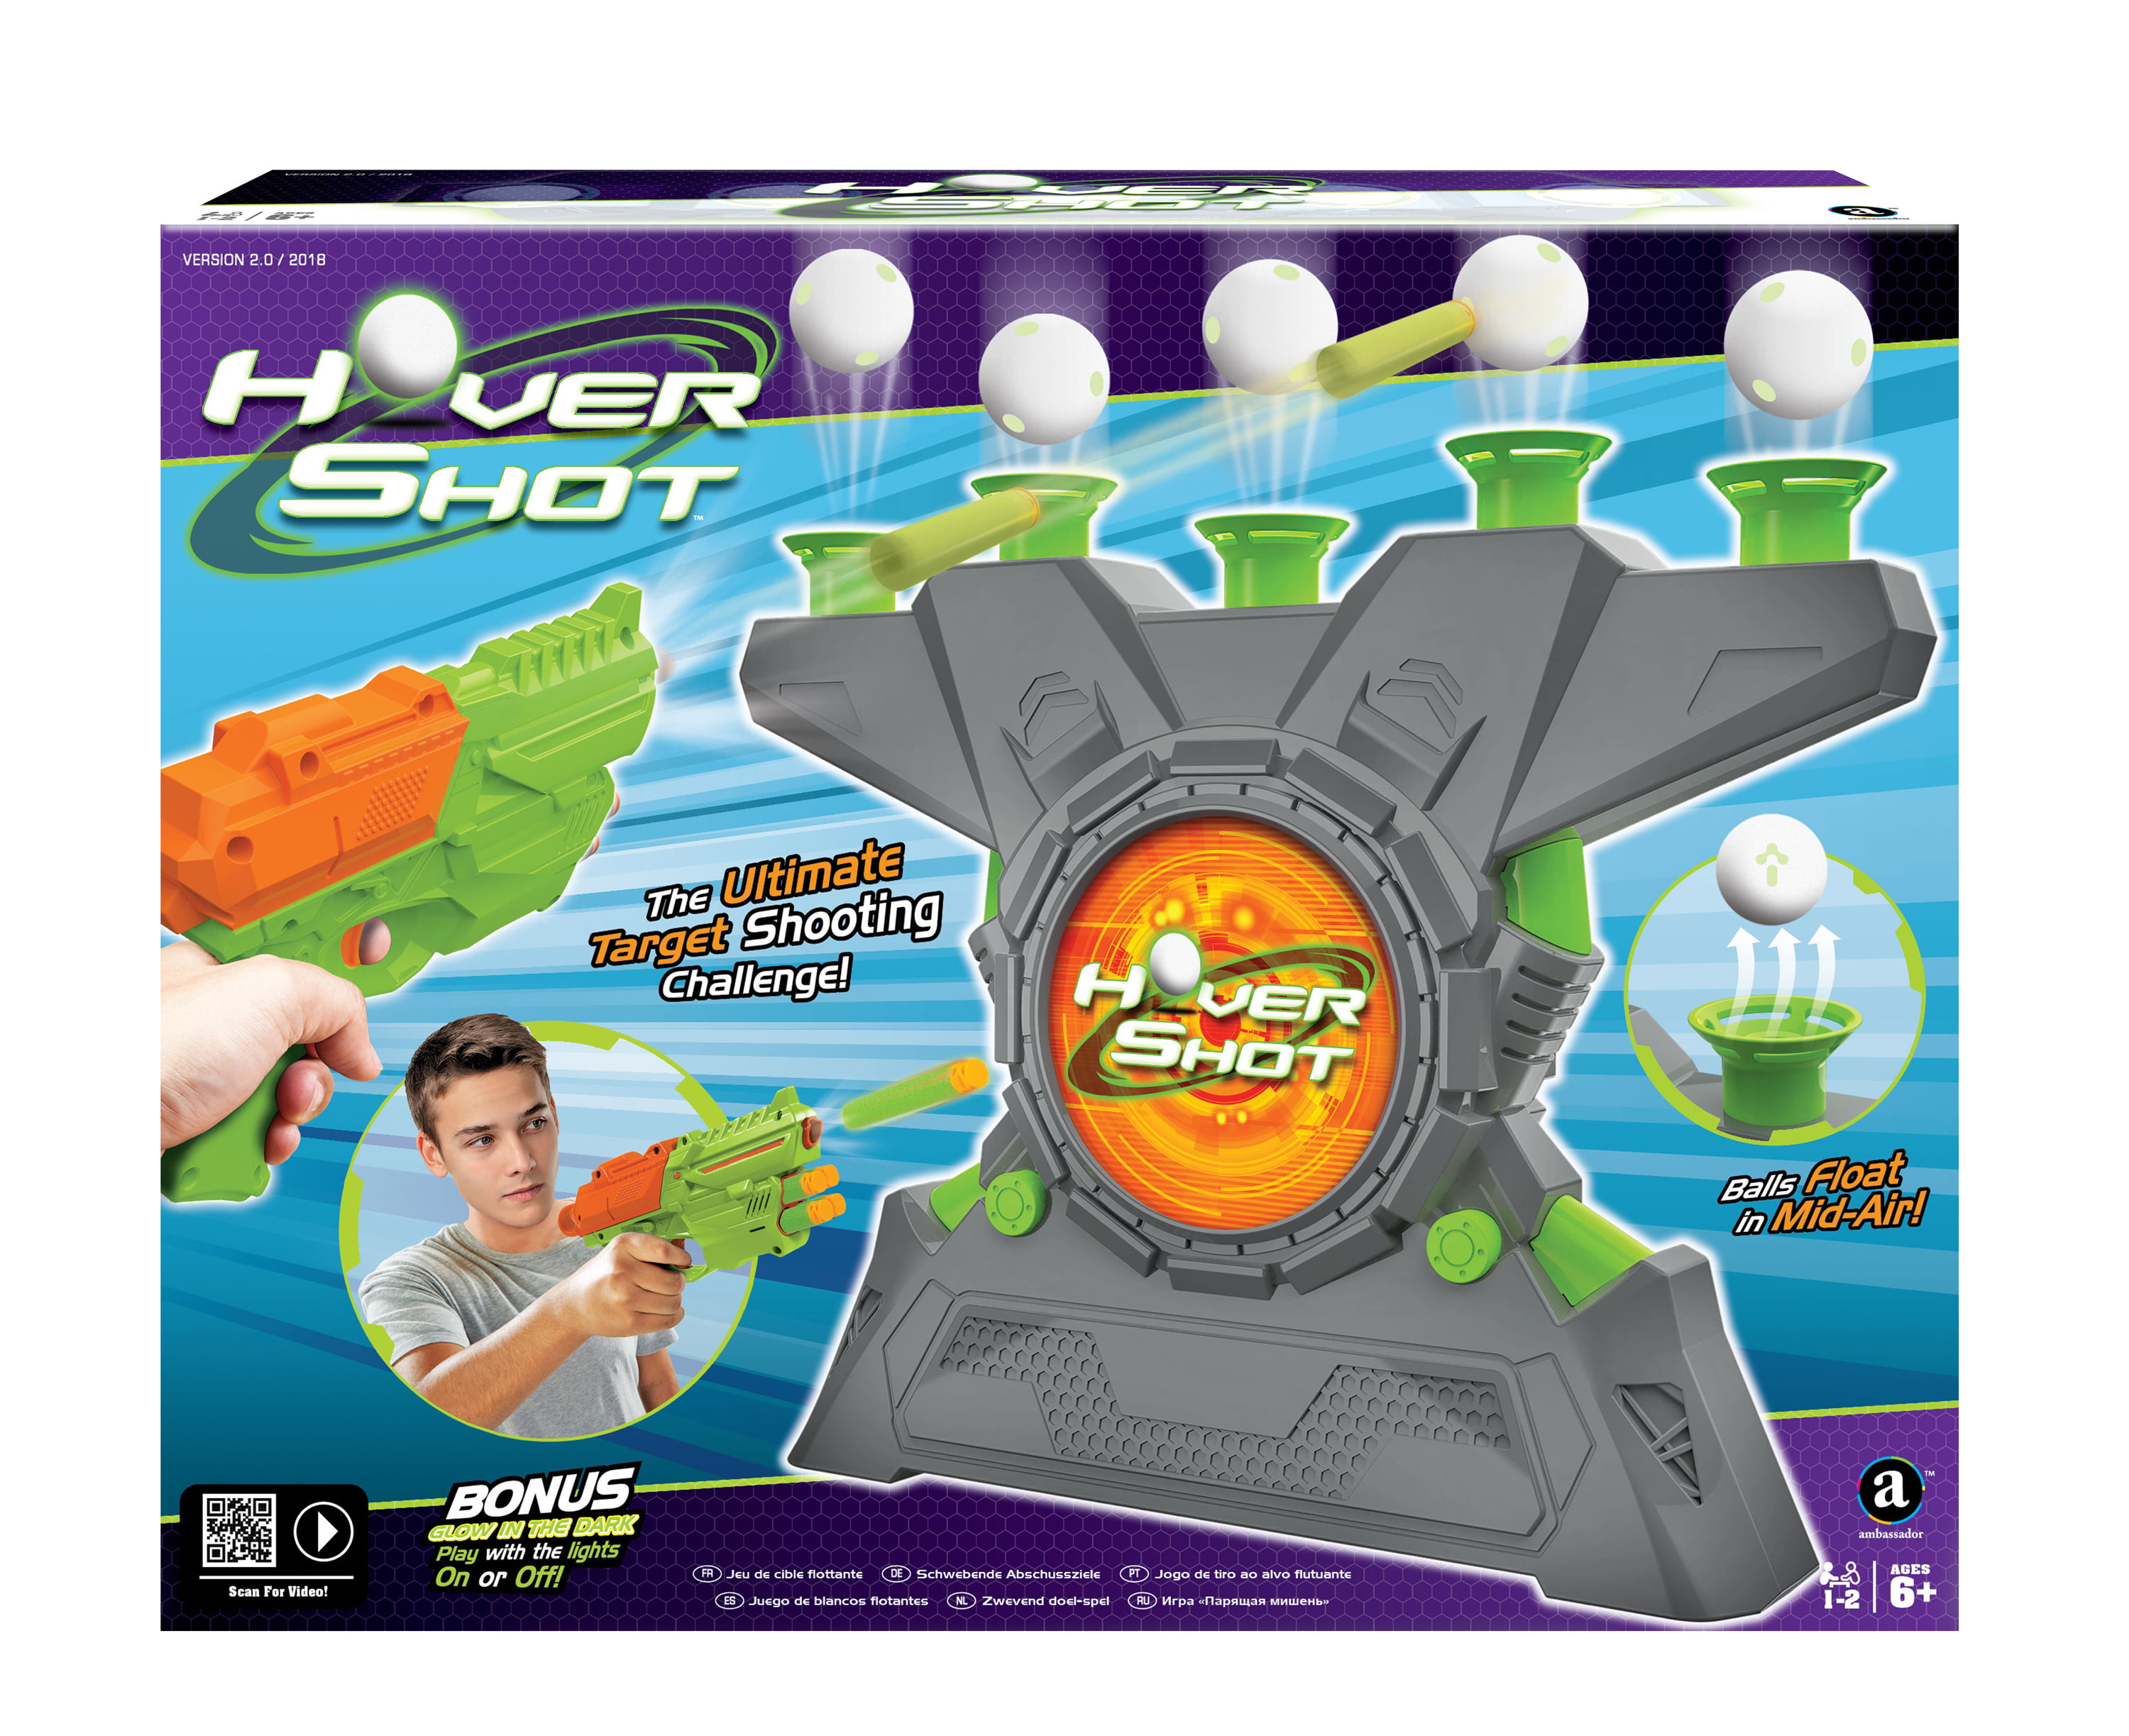 Upgraded Hover Shot Floating Target Game,Glowing Night Flying Ball with Music Table Tennis Target Shoot Play Set Shooter Target Game Suspension Ball Target for Kids Children,Educational Toy Gift 